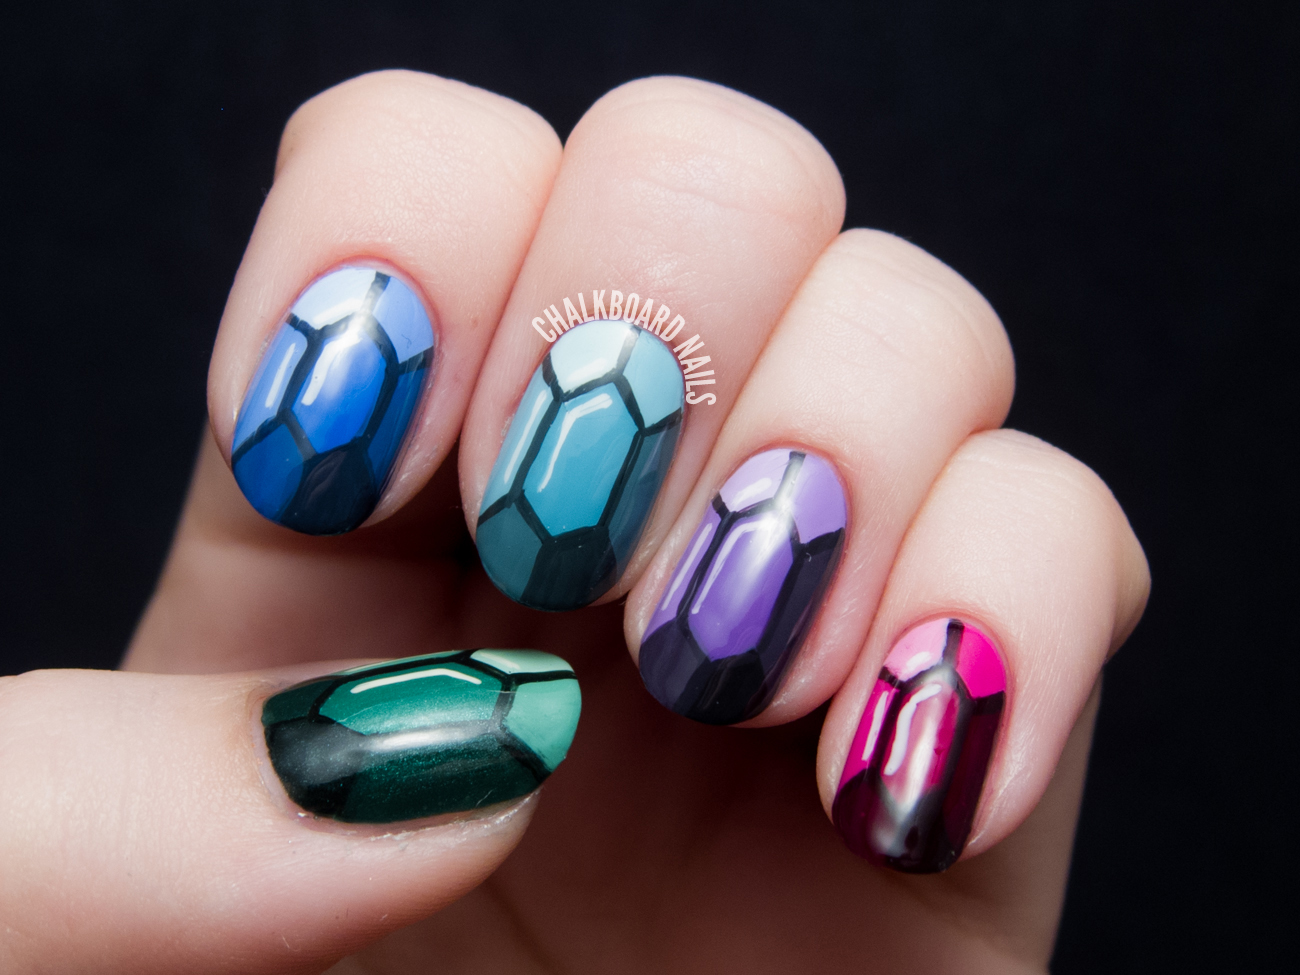 7. "Nail polish with gem accents" - wide 6